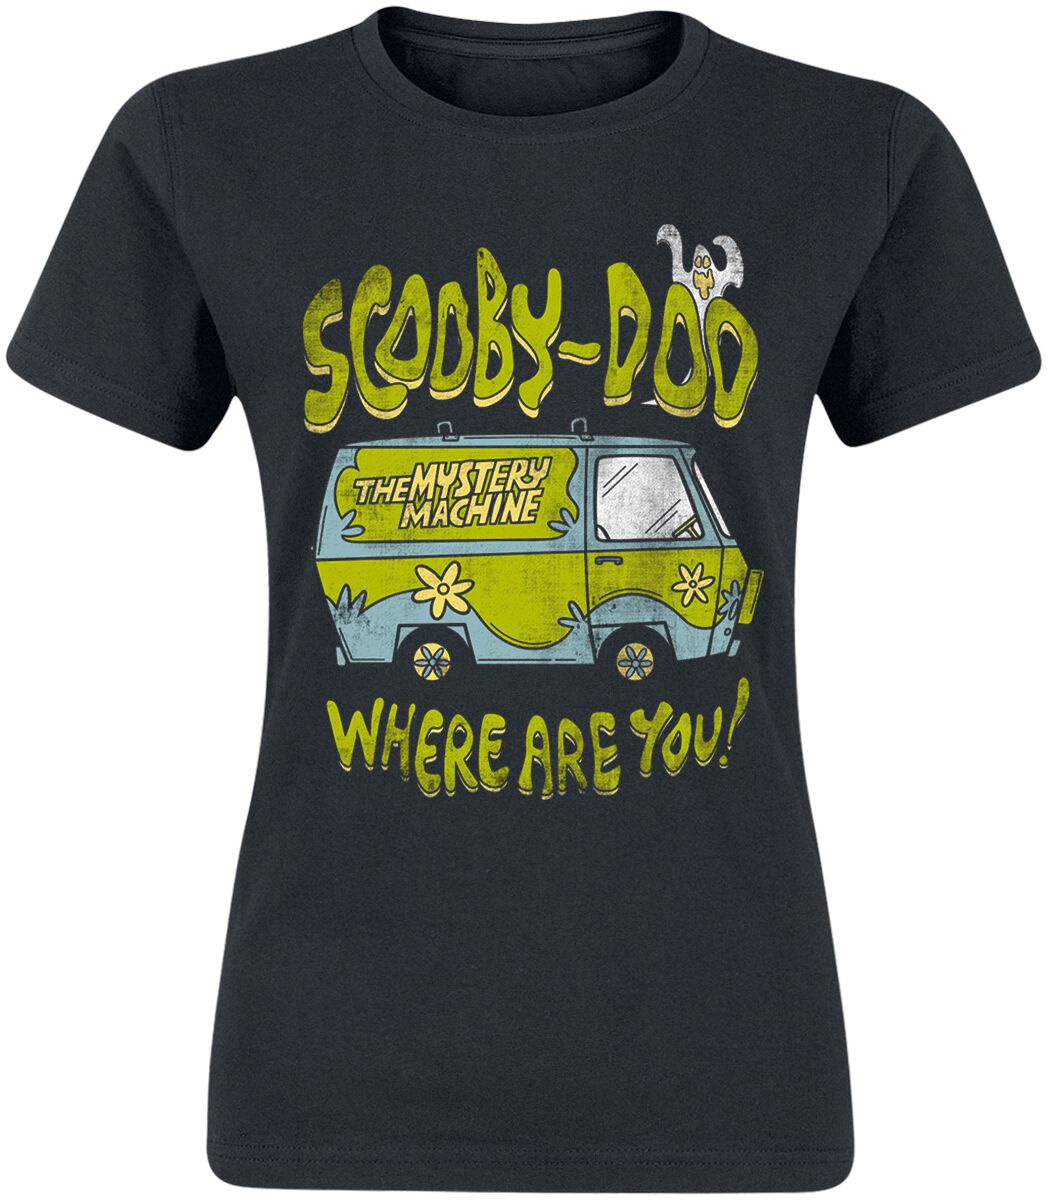 Scooby-Doo Where Are You! T-Shirt black